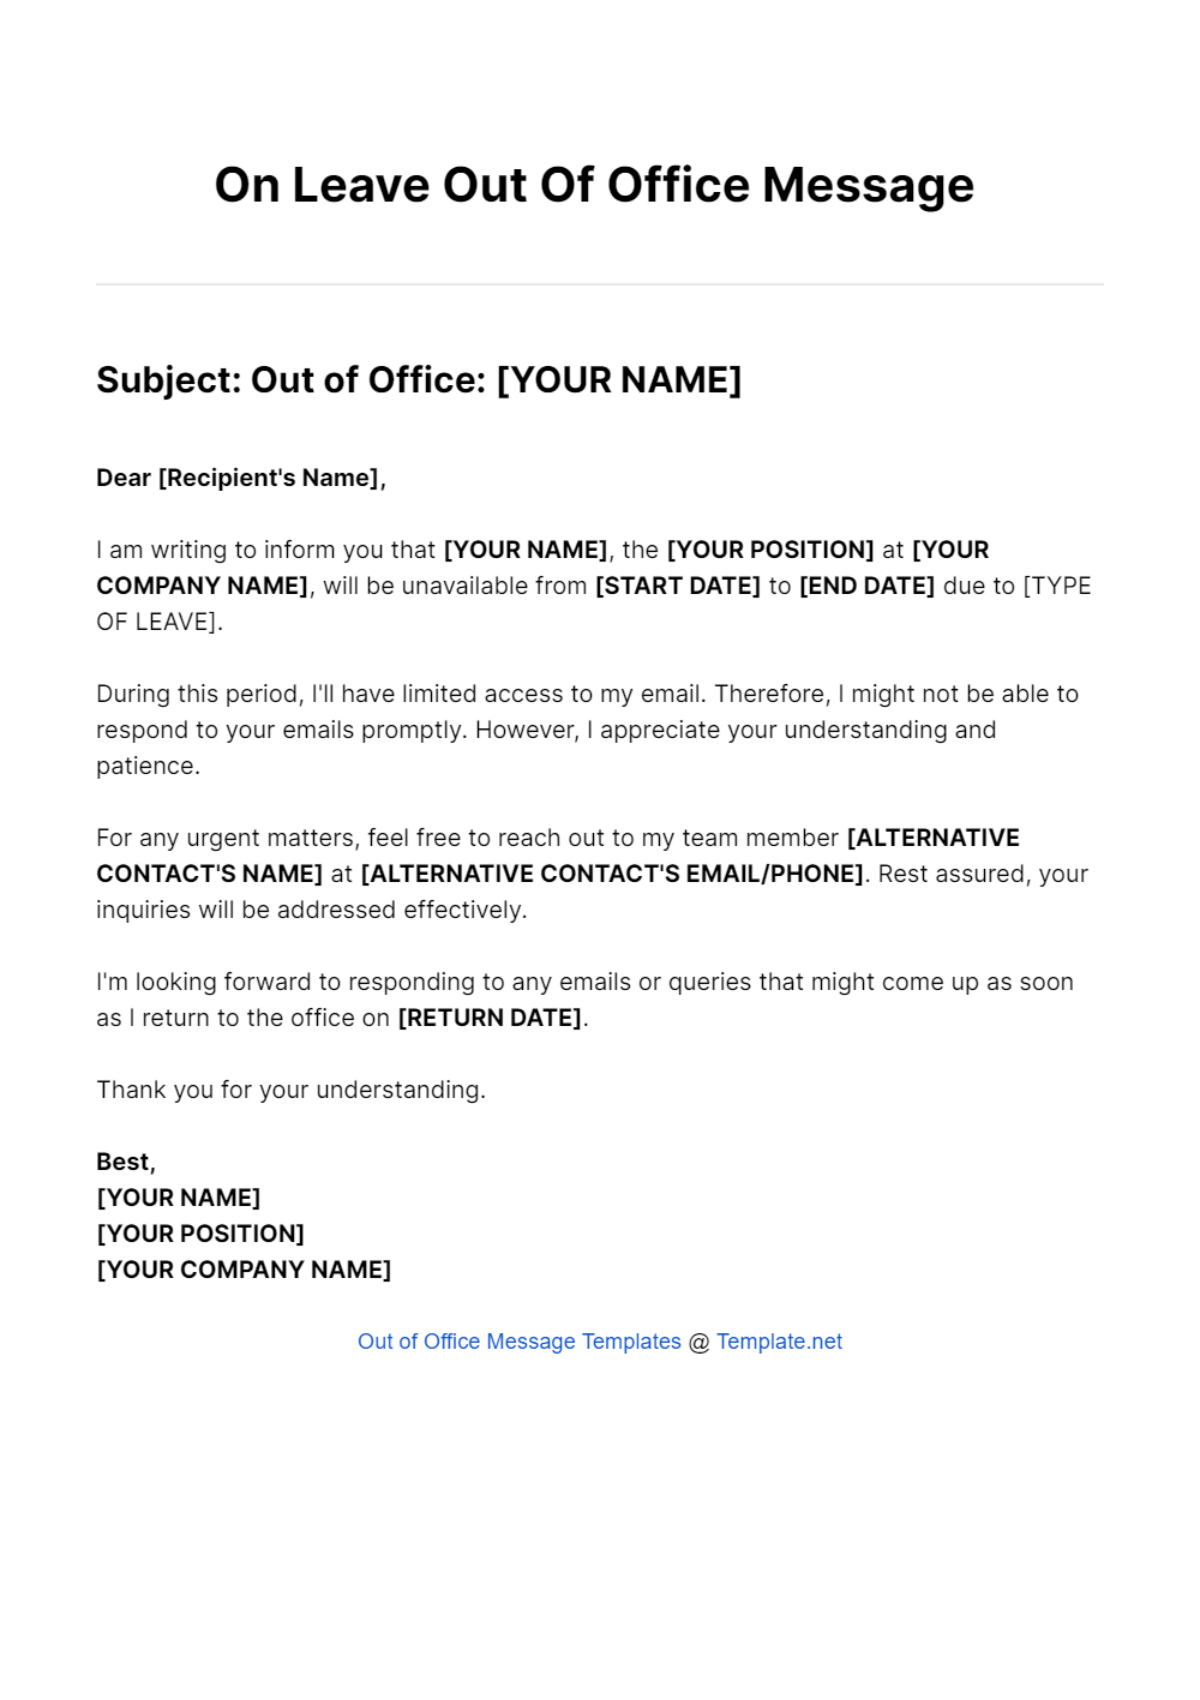 On Leave Out Of Office Message Template